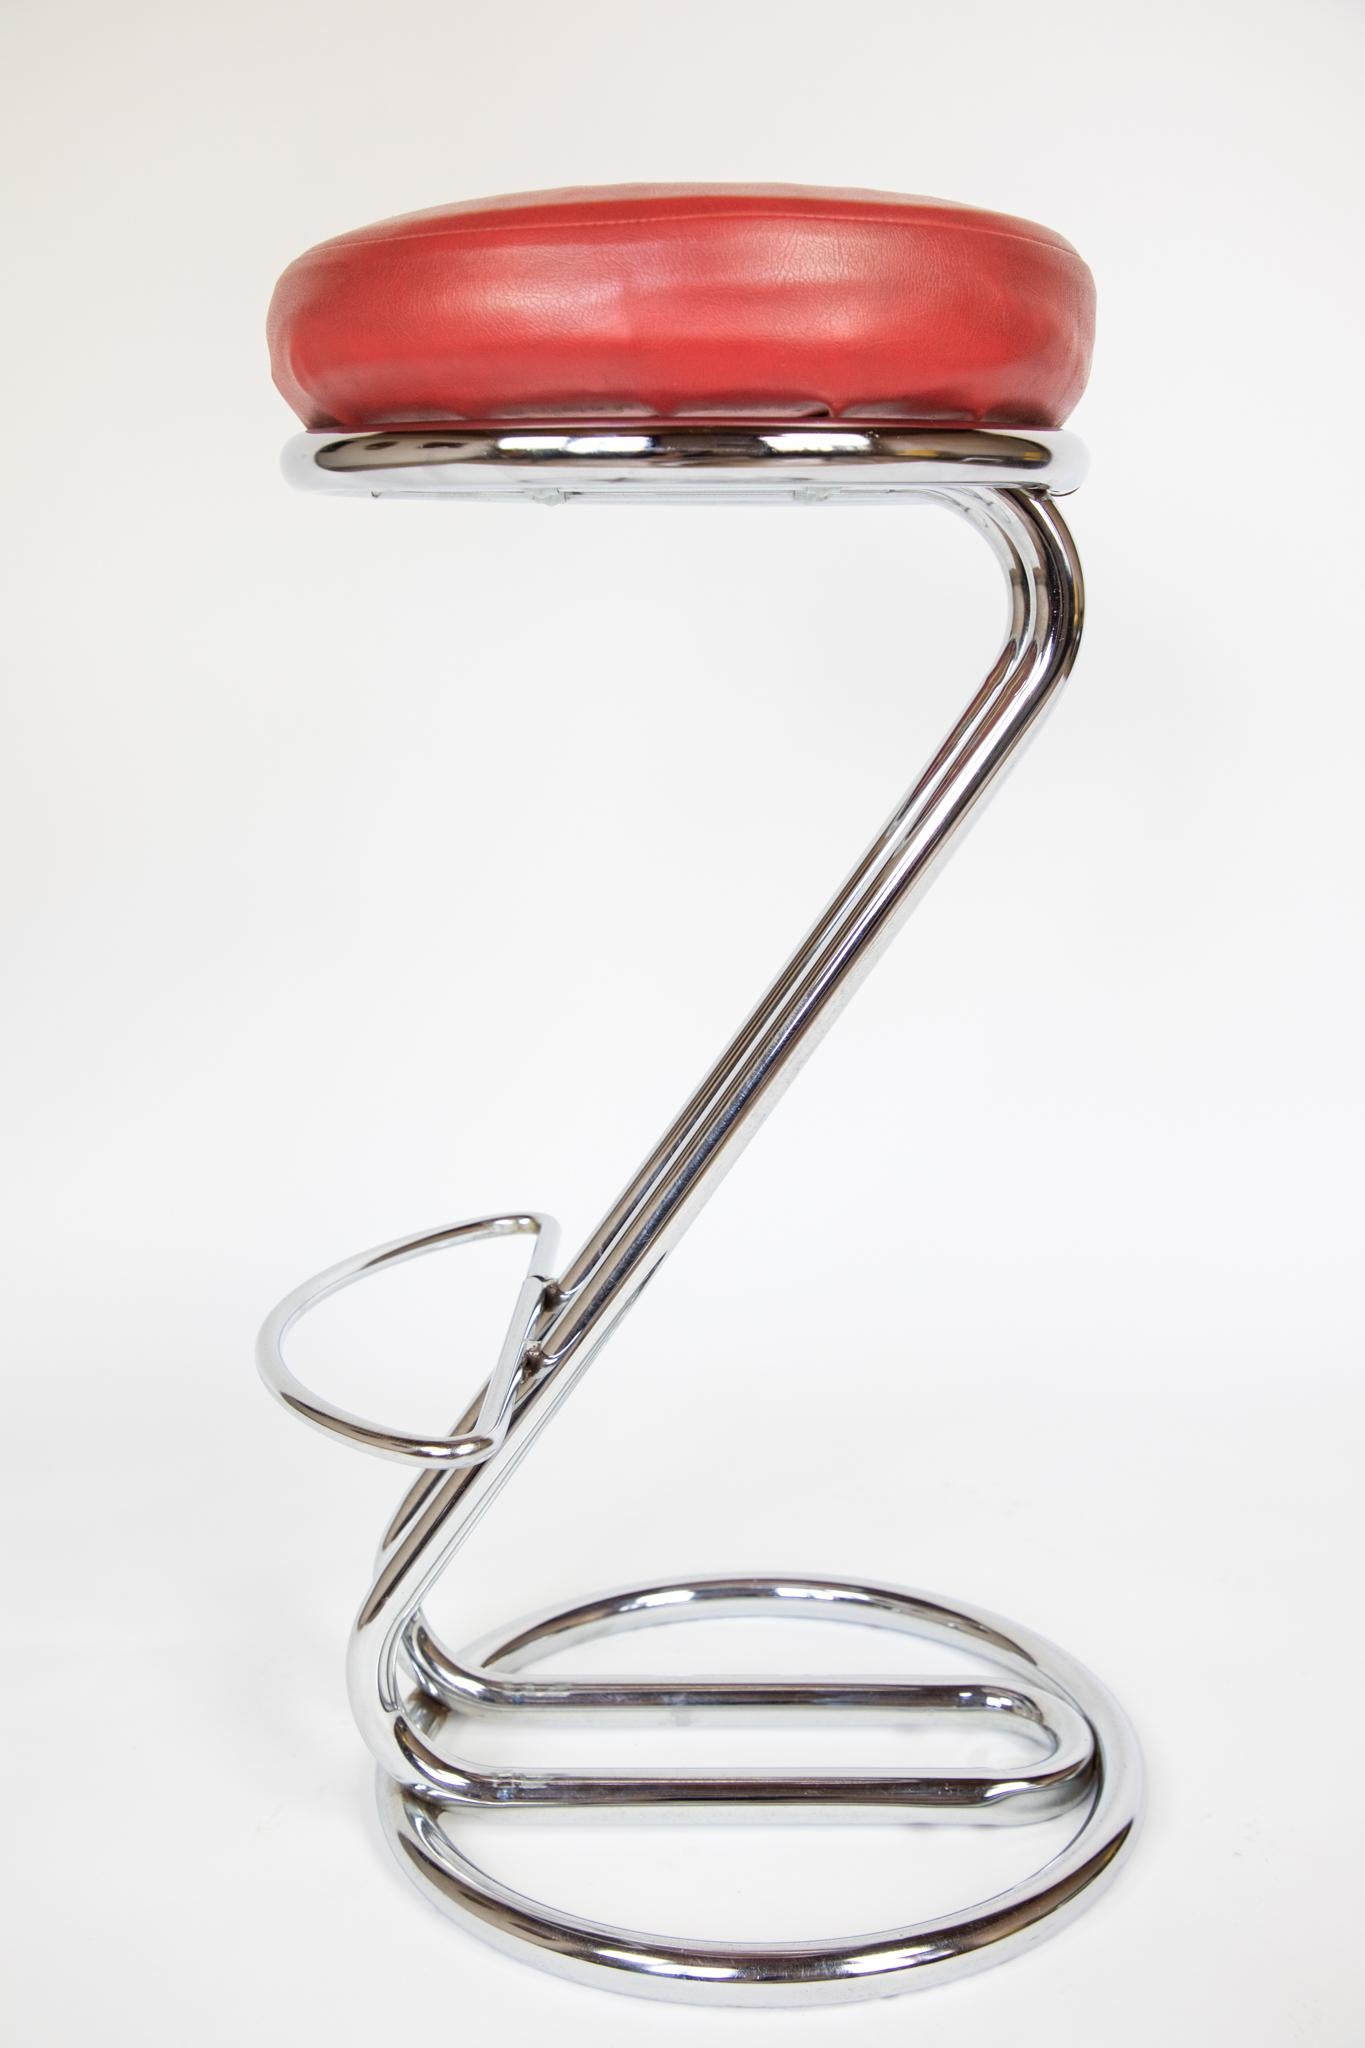 Mid Century Modern Diner Bar Stools Red Faux Leather, Chrome, Italy, 1950s.

From the ice cream shops of the 50s to the mom-and-pop diners of today, diner bar stools are iconic. This stylish bar stool is a perfect combination of steel construction